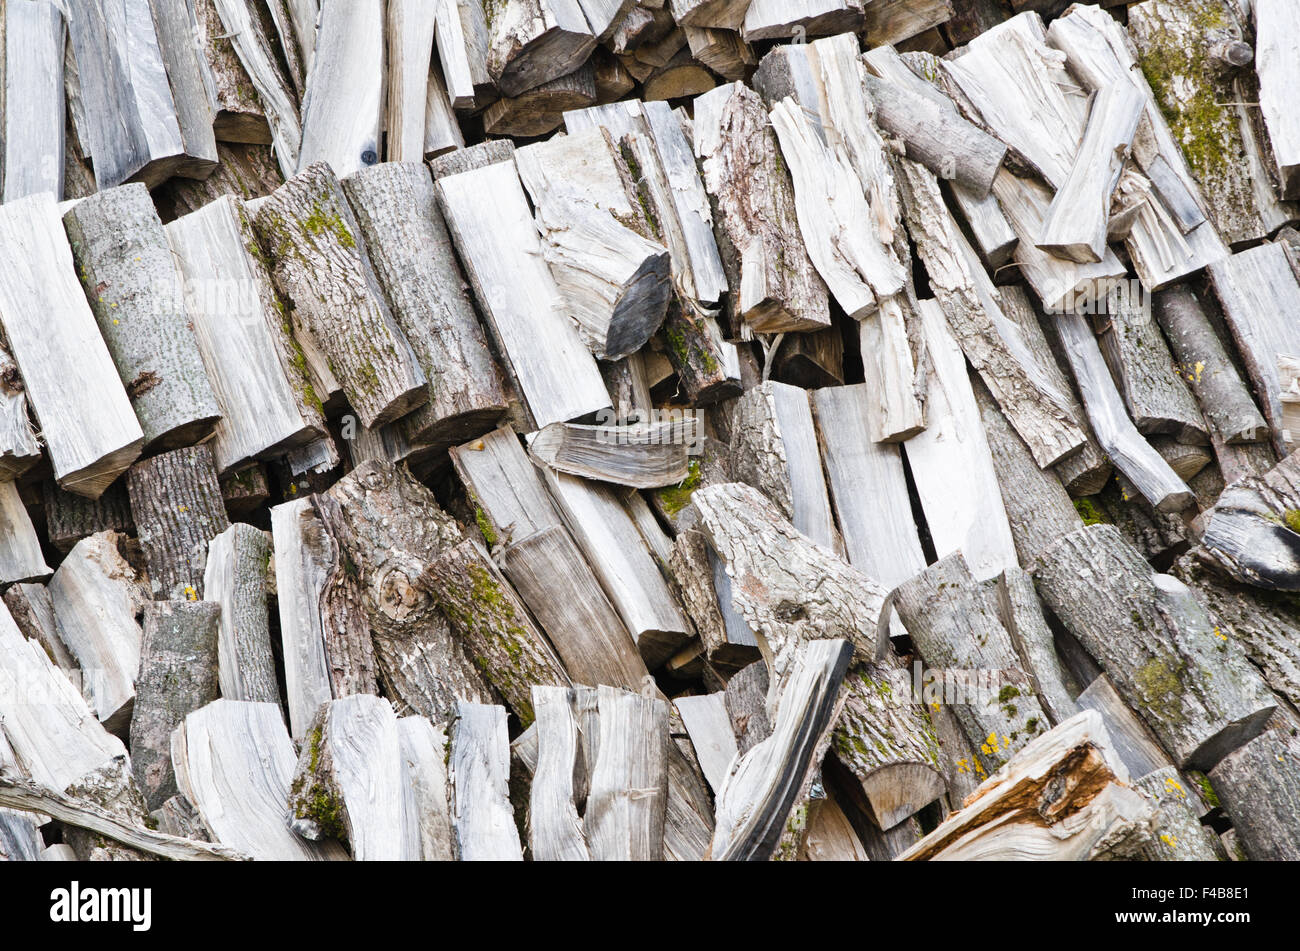 folded rows of firewood, close-up Stock Photo